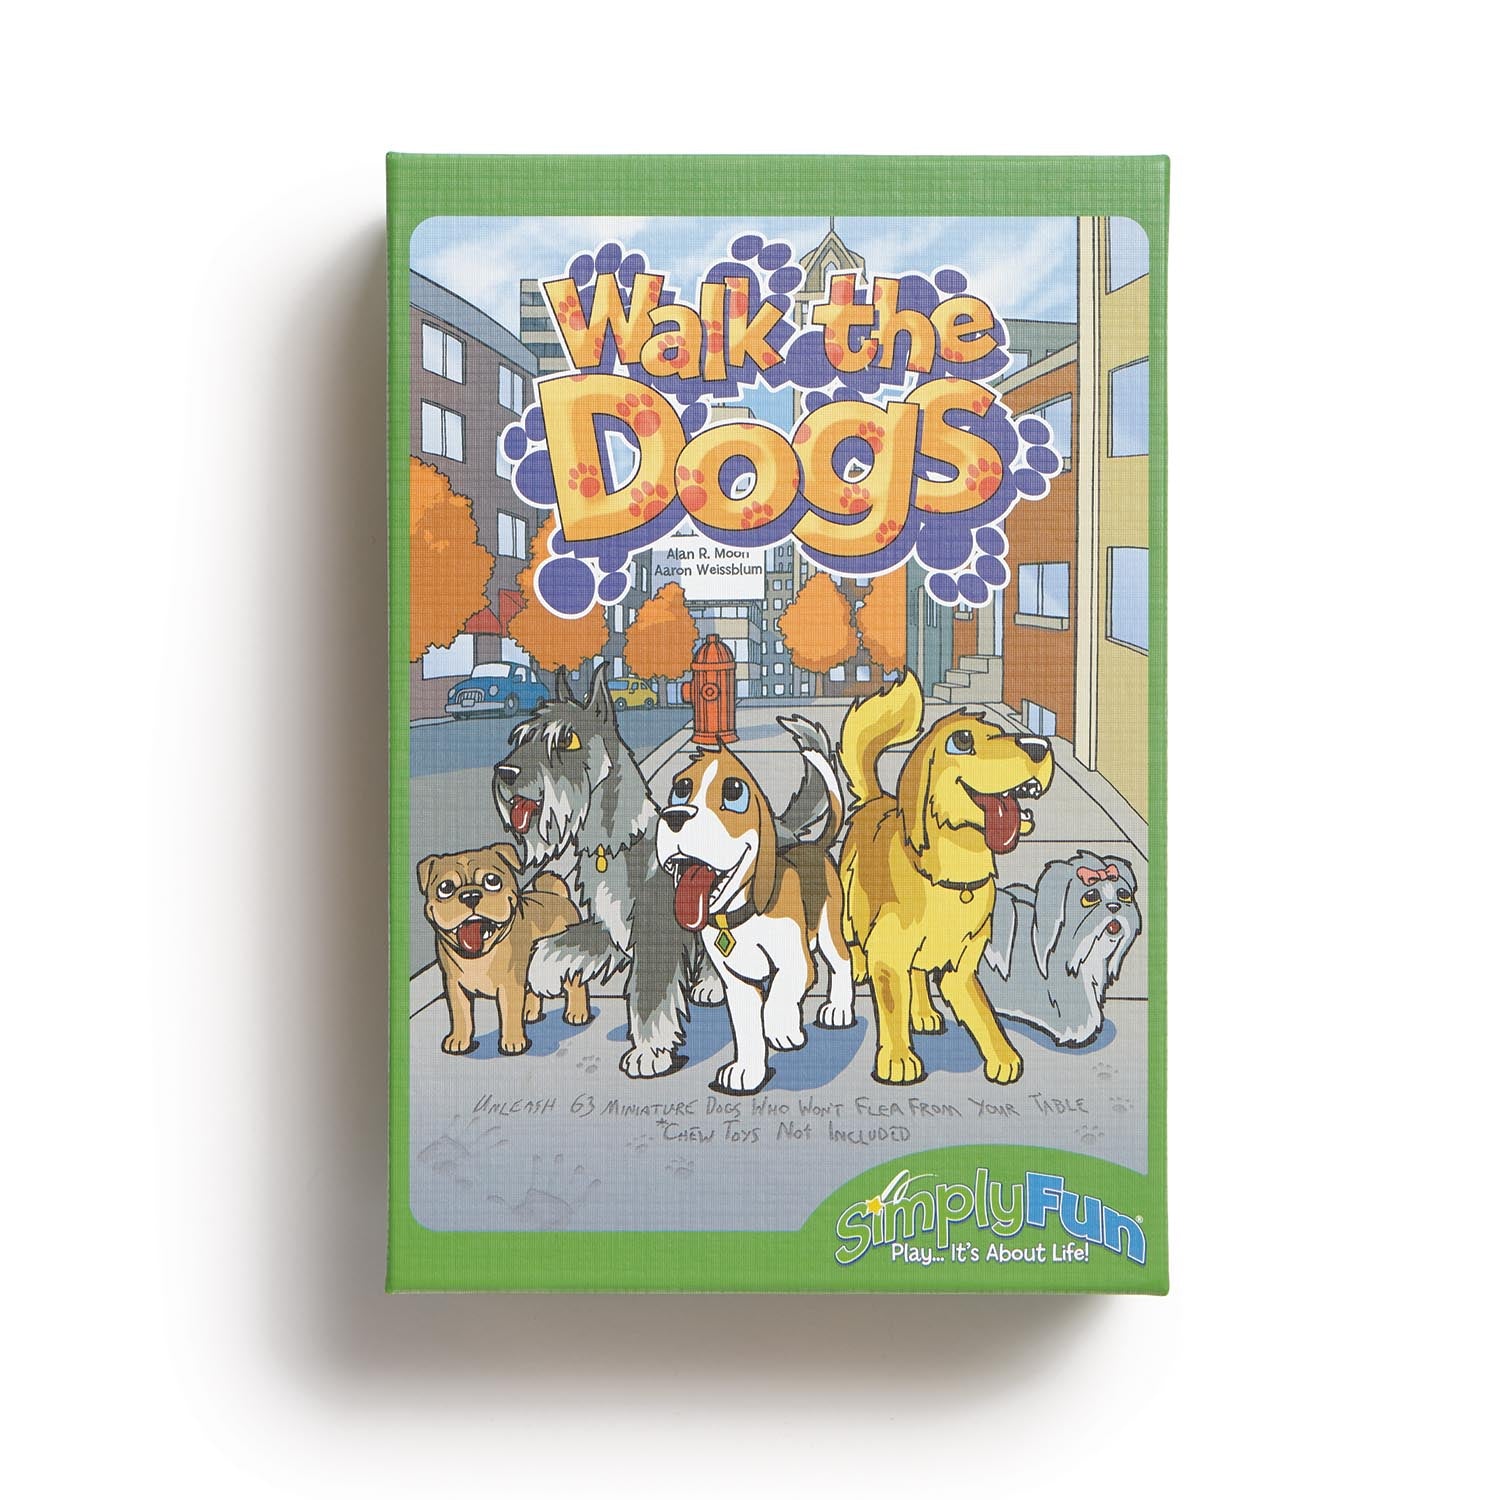 Hasbro Updates the Game of Life with Pets Edition - The Toy Book